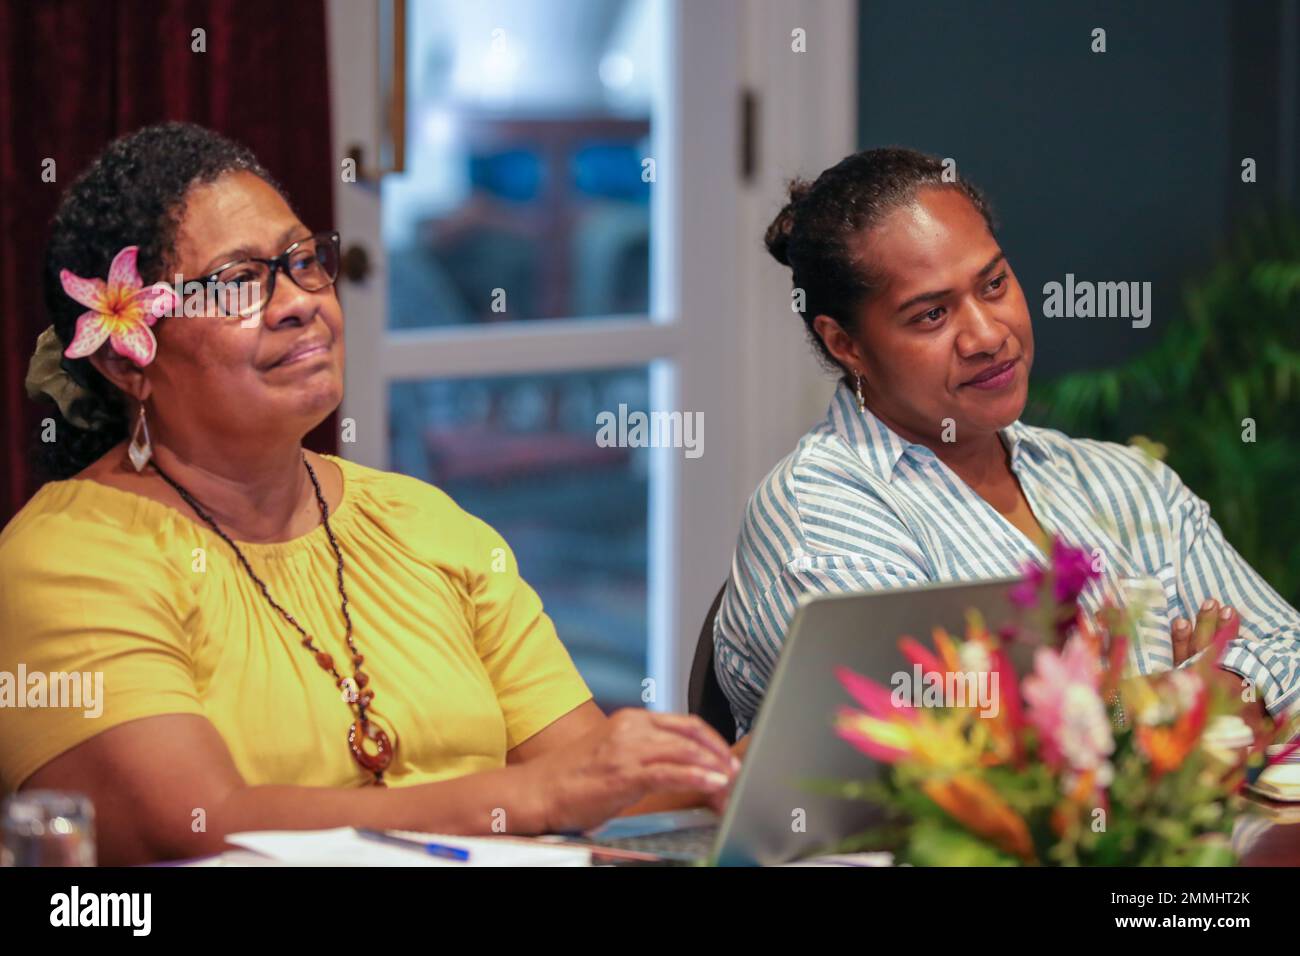 From left, Adi Vasulevu Levu, Executive Director of Transcend Oceania, and Republic of Fiji Military Forces Cpt. Ana Vuniwaqa attend a Coordinating Committee meeting for Fiji’s first Women, Peace and Security National Action Plan Orientation Workshop in Suva, Fiji, Sept. 19, 2022. Facilitated by U.S. Indo-Pacific Command, the Coordinating Committee consists of Fijian government and civil society organization representatives who oversee the development of a Fiji WPS National Action Plan guided by UN Security Council Resolution (UNSCR) 1325 principles and gender perspective. Stock Photo